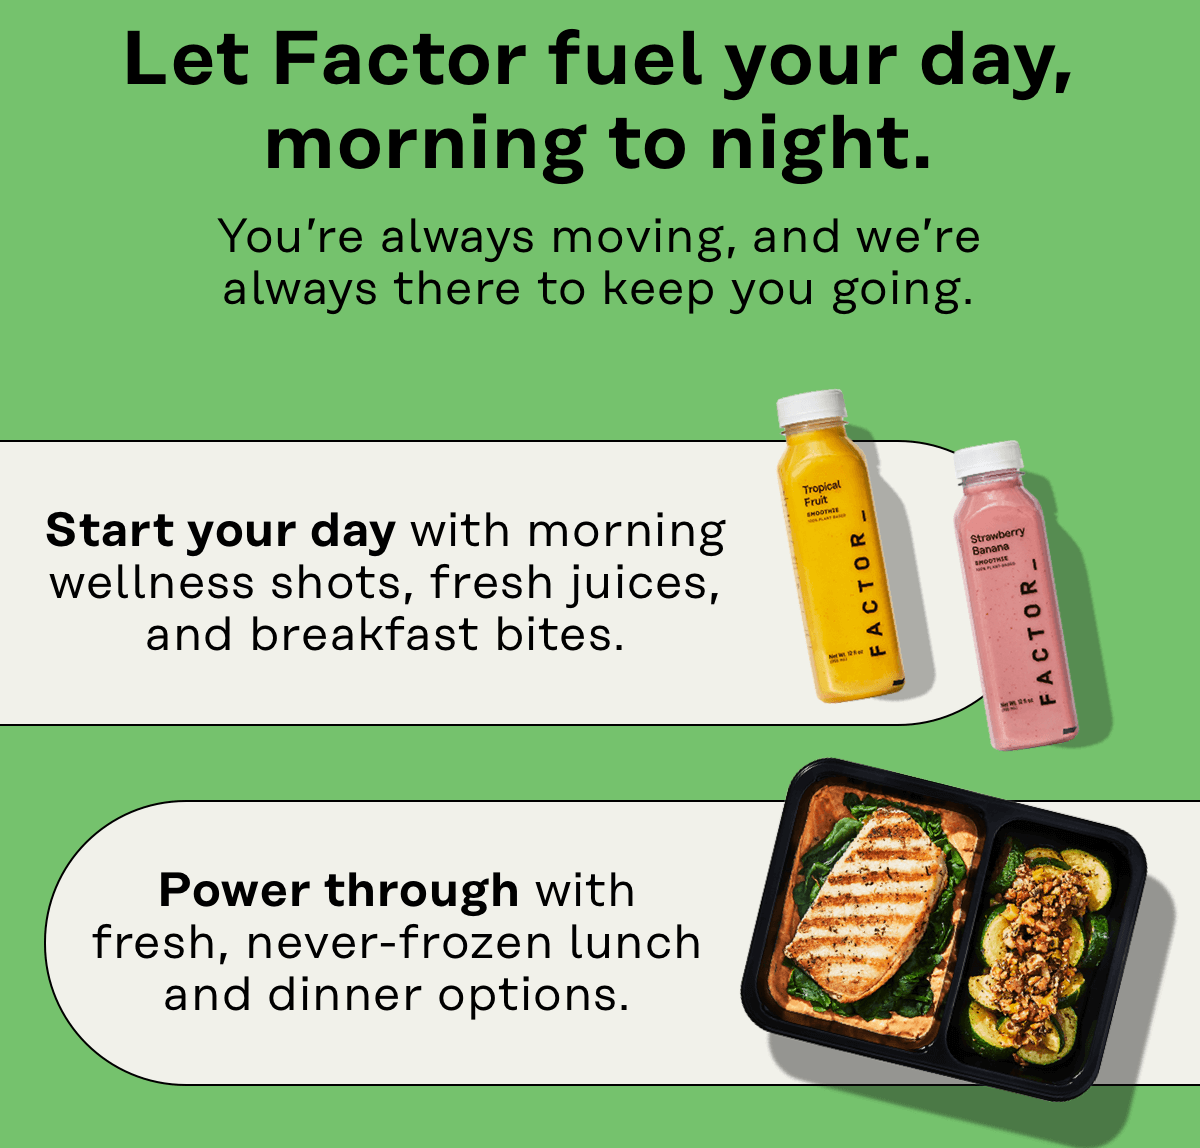 Let Factor fuel your day, morning to night. You're always moving, and we're always there to keep you going